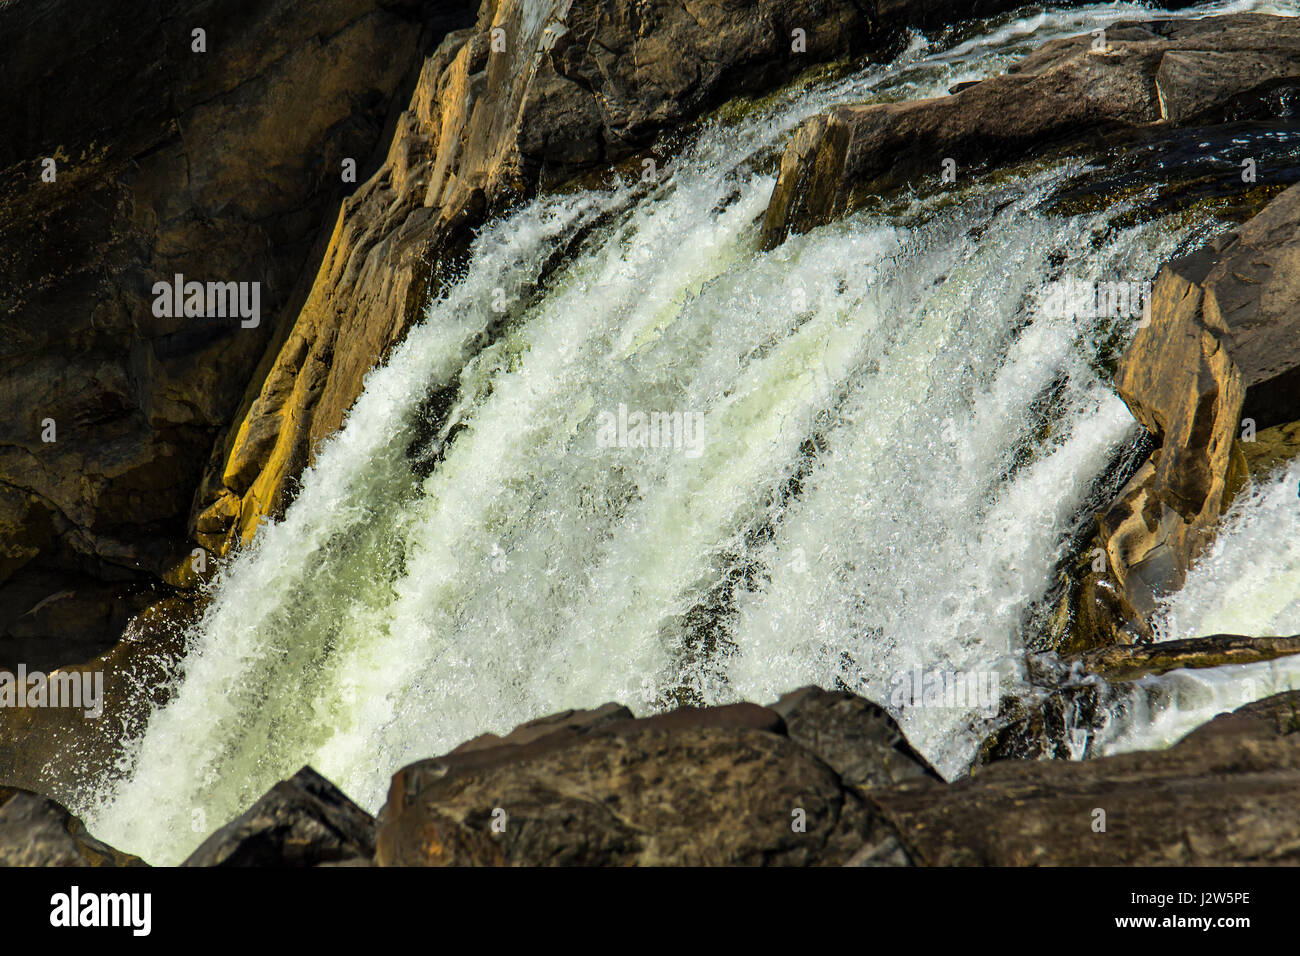 Part of cataracts at Great Falls of the Potomac River Stock Photo